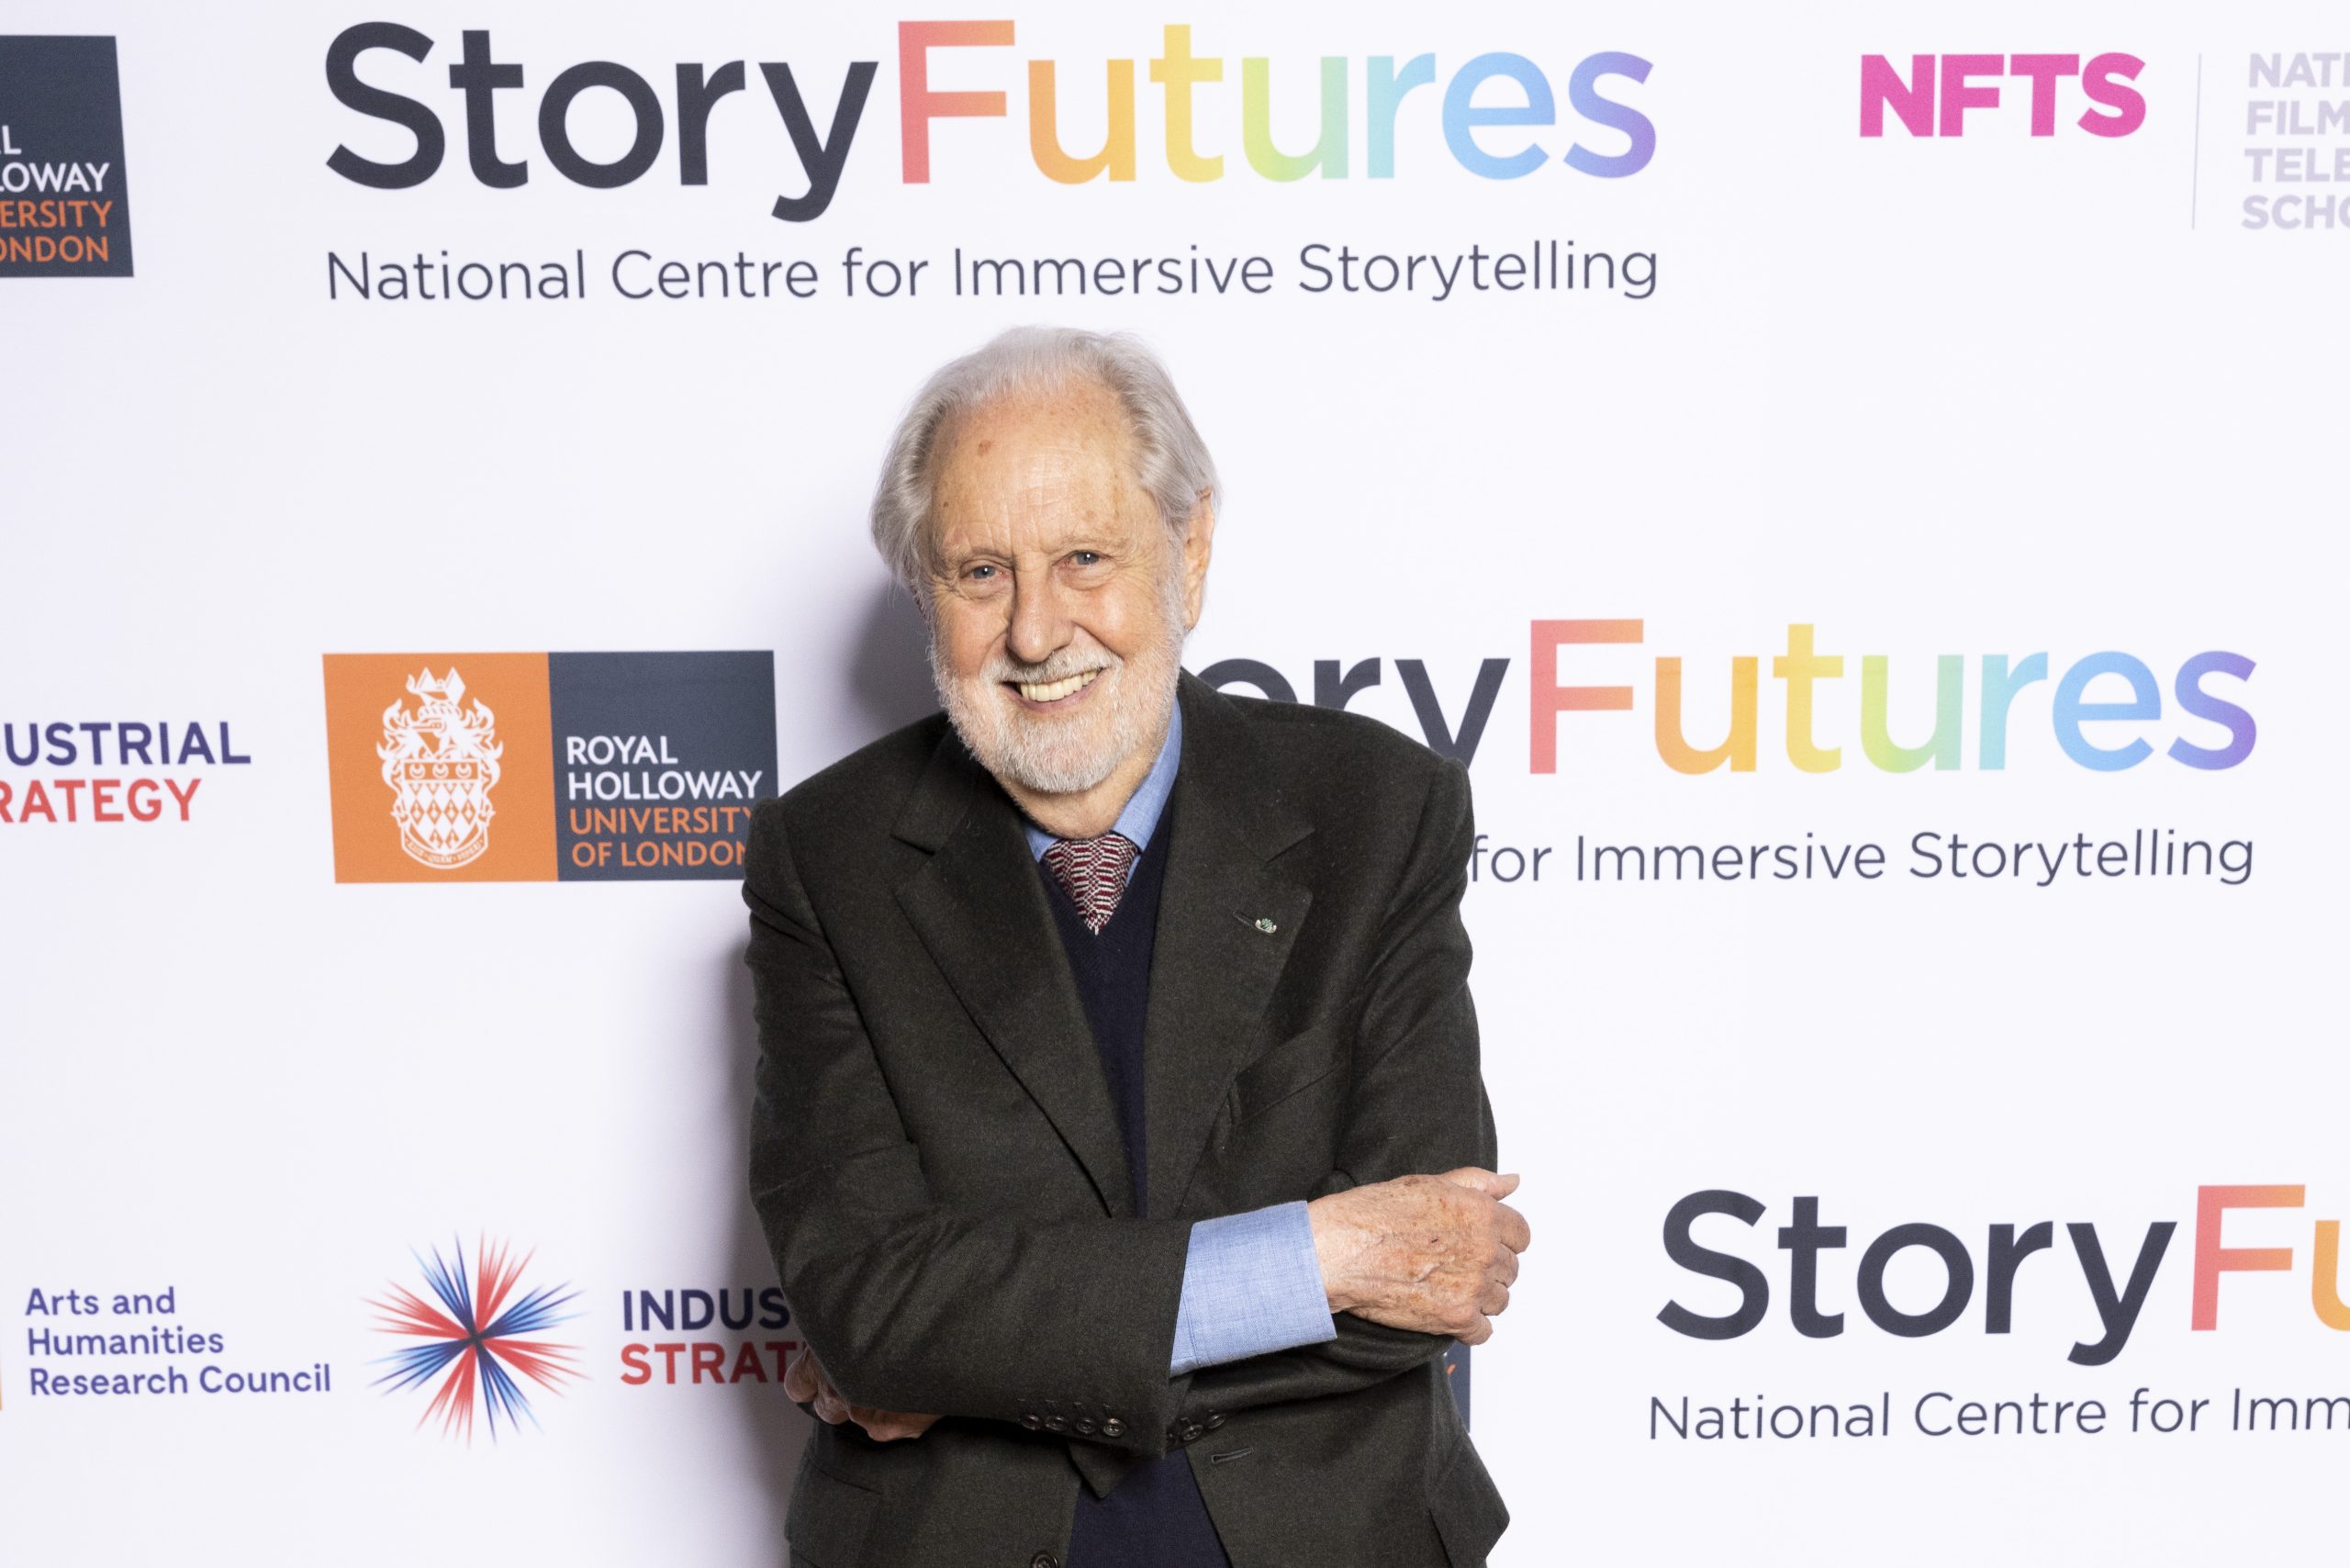 Surrey & StoryFutures – the home of a new UKRI Centre for AI for Digital Media Inclusion